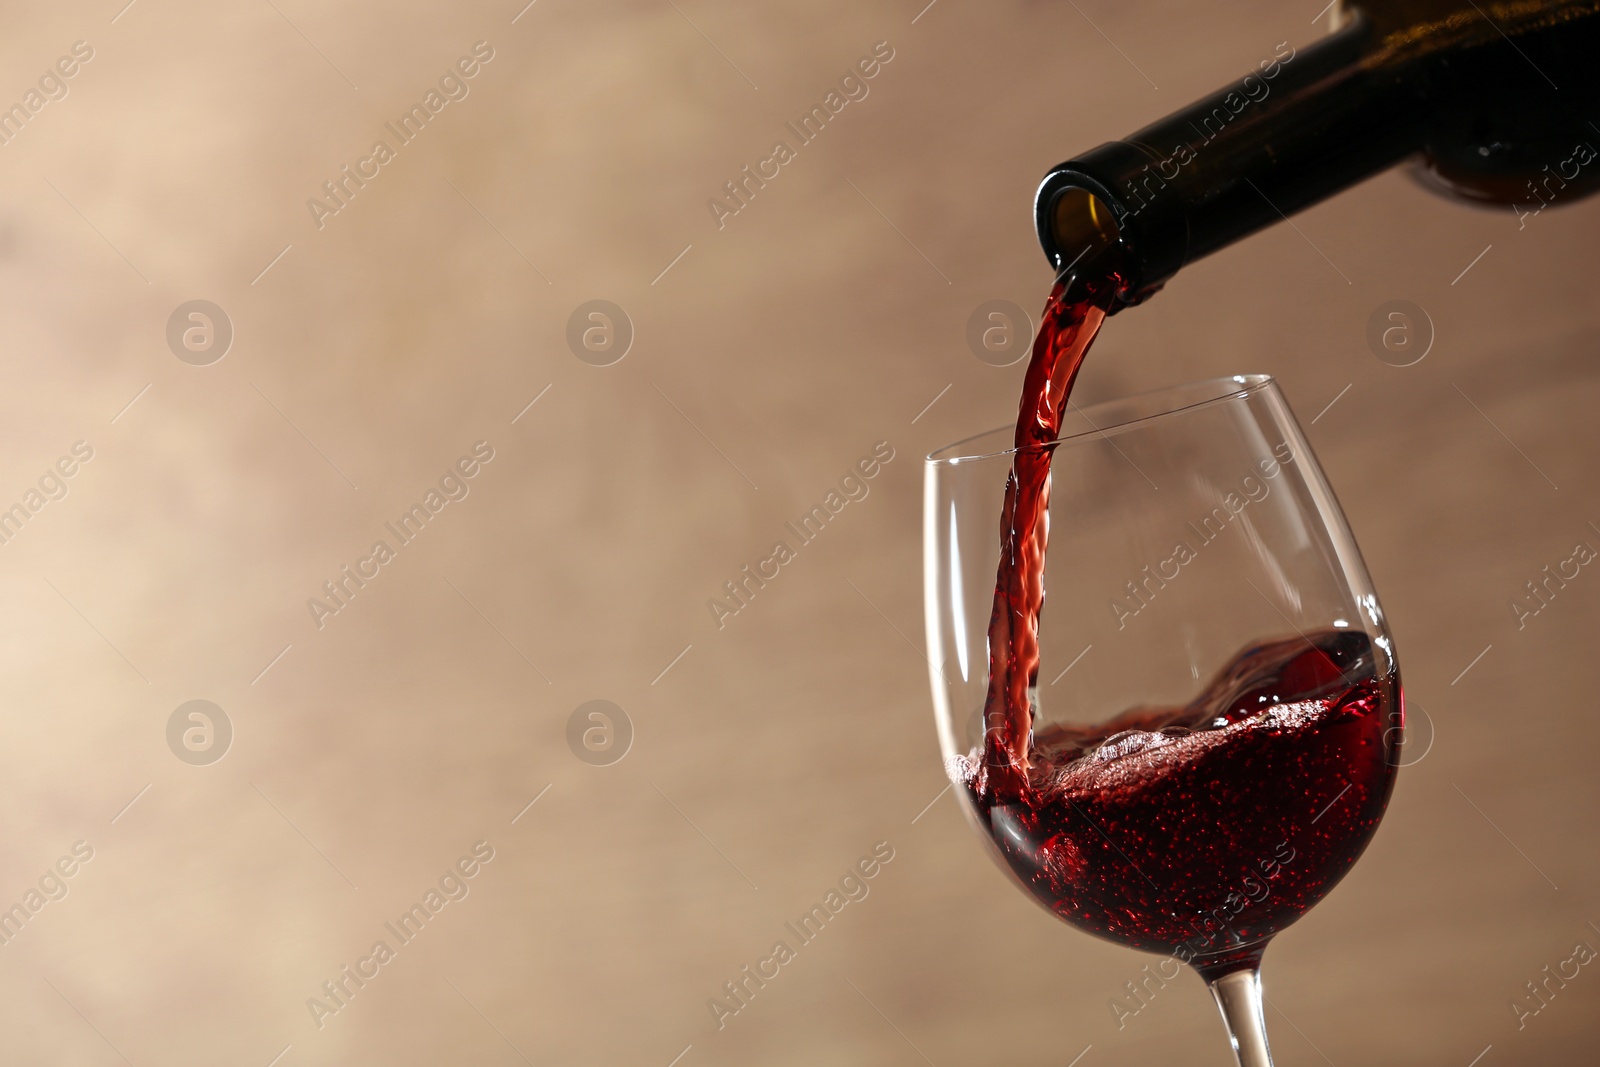 Photo of Pouring red wine into glass from bottle against blurred beige background, closeup. Space for text